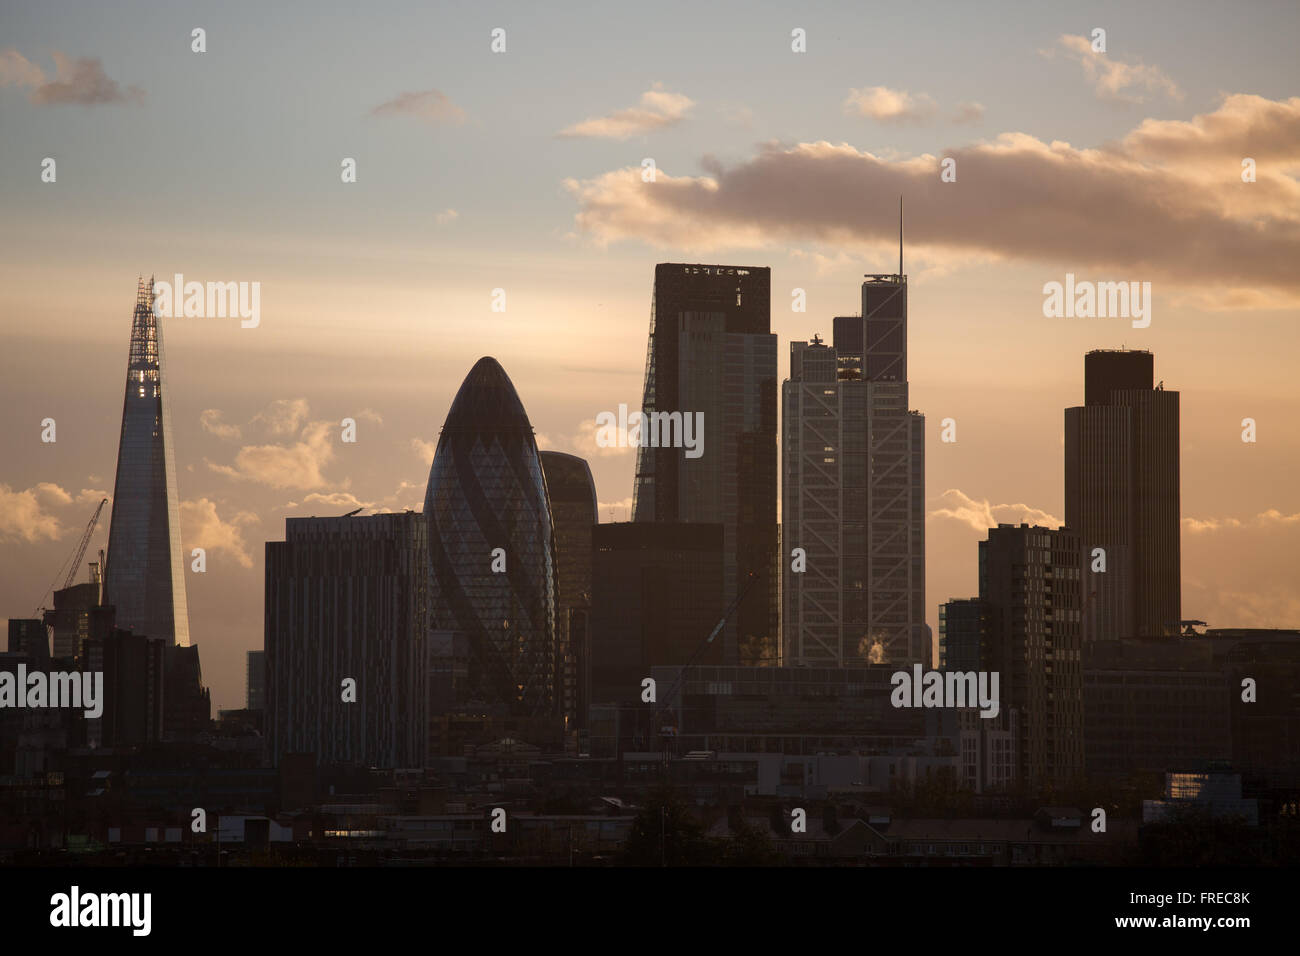 View of the City of London, seen from Hackney, East London. The sun setting making it the golden hour. Stock Photo